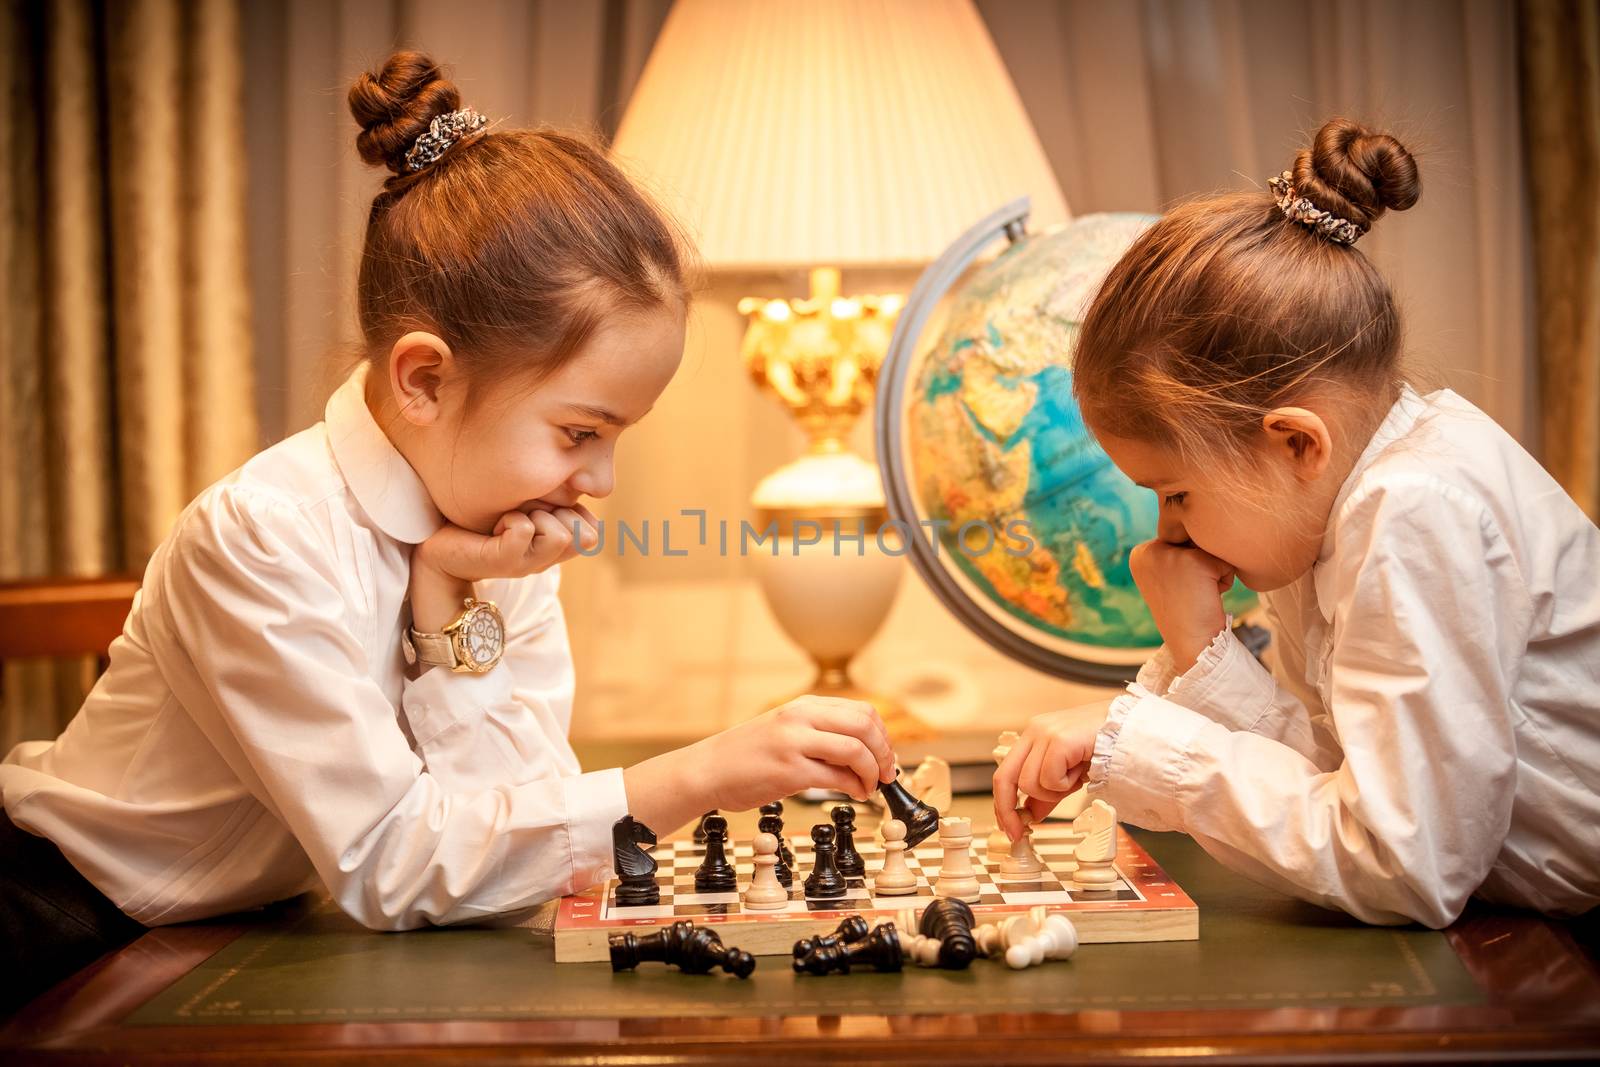 Girls in school uniform playing chess at cabinet